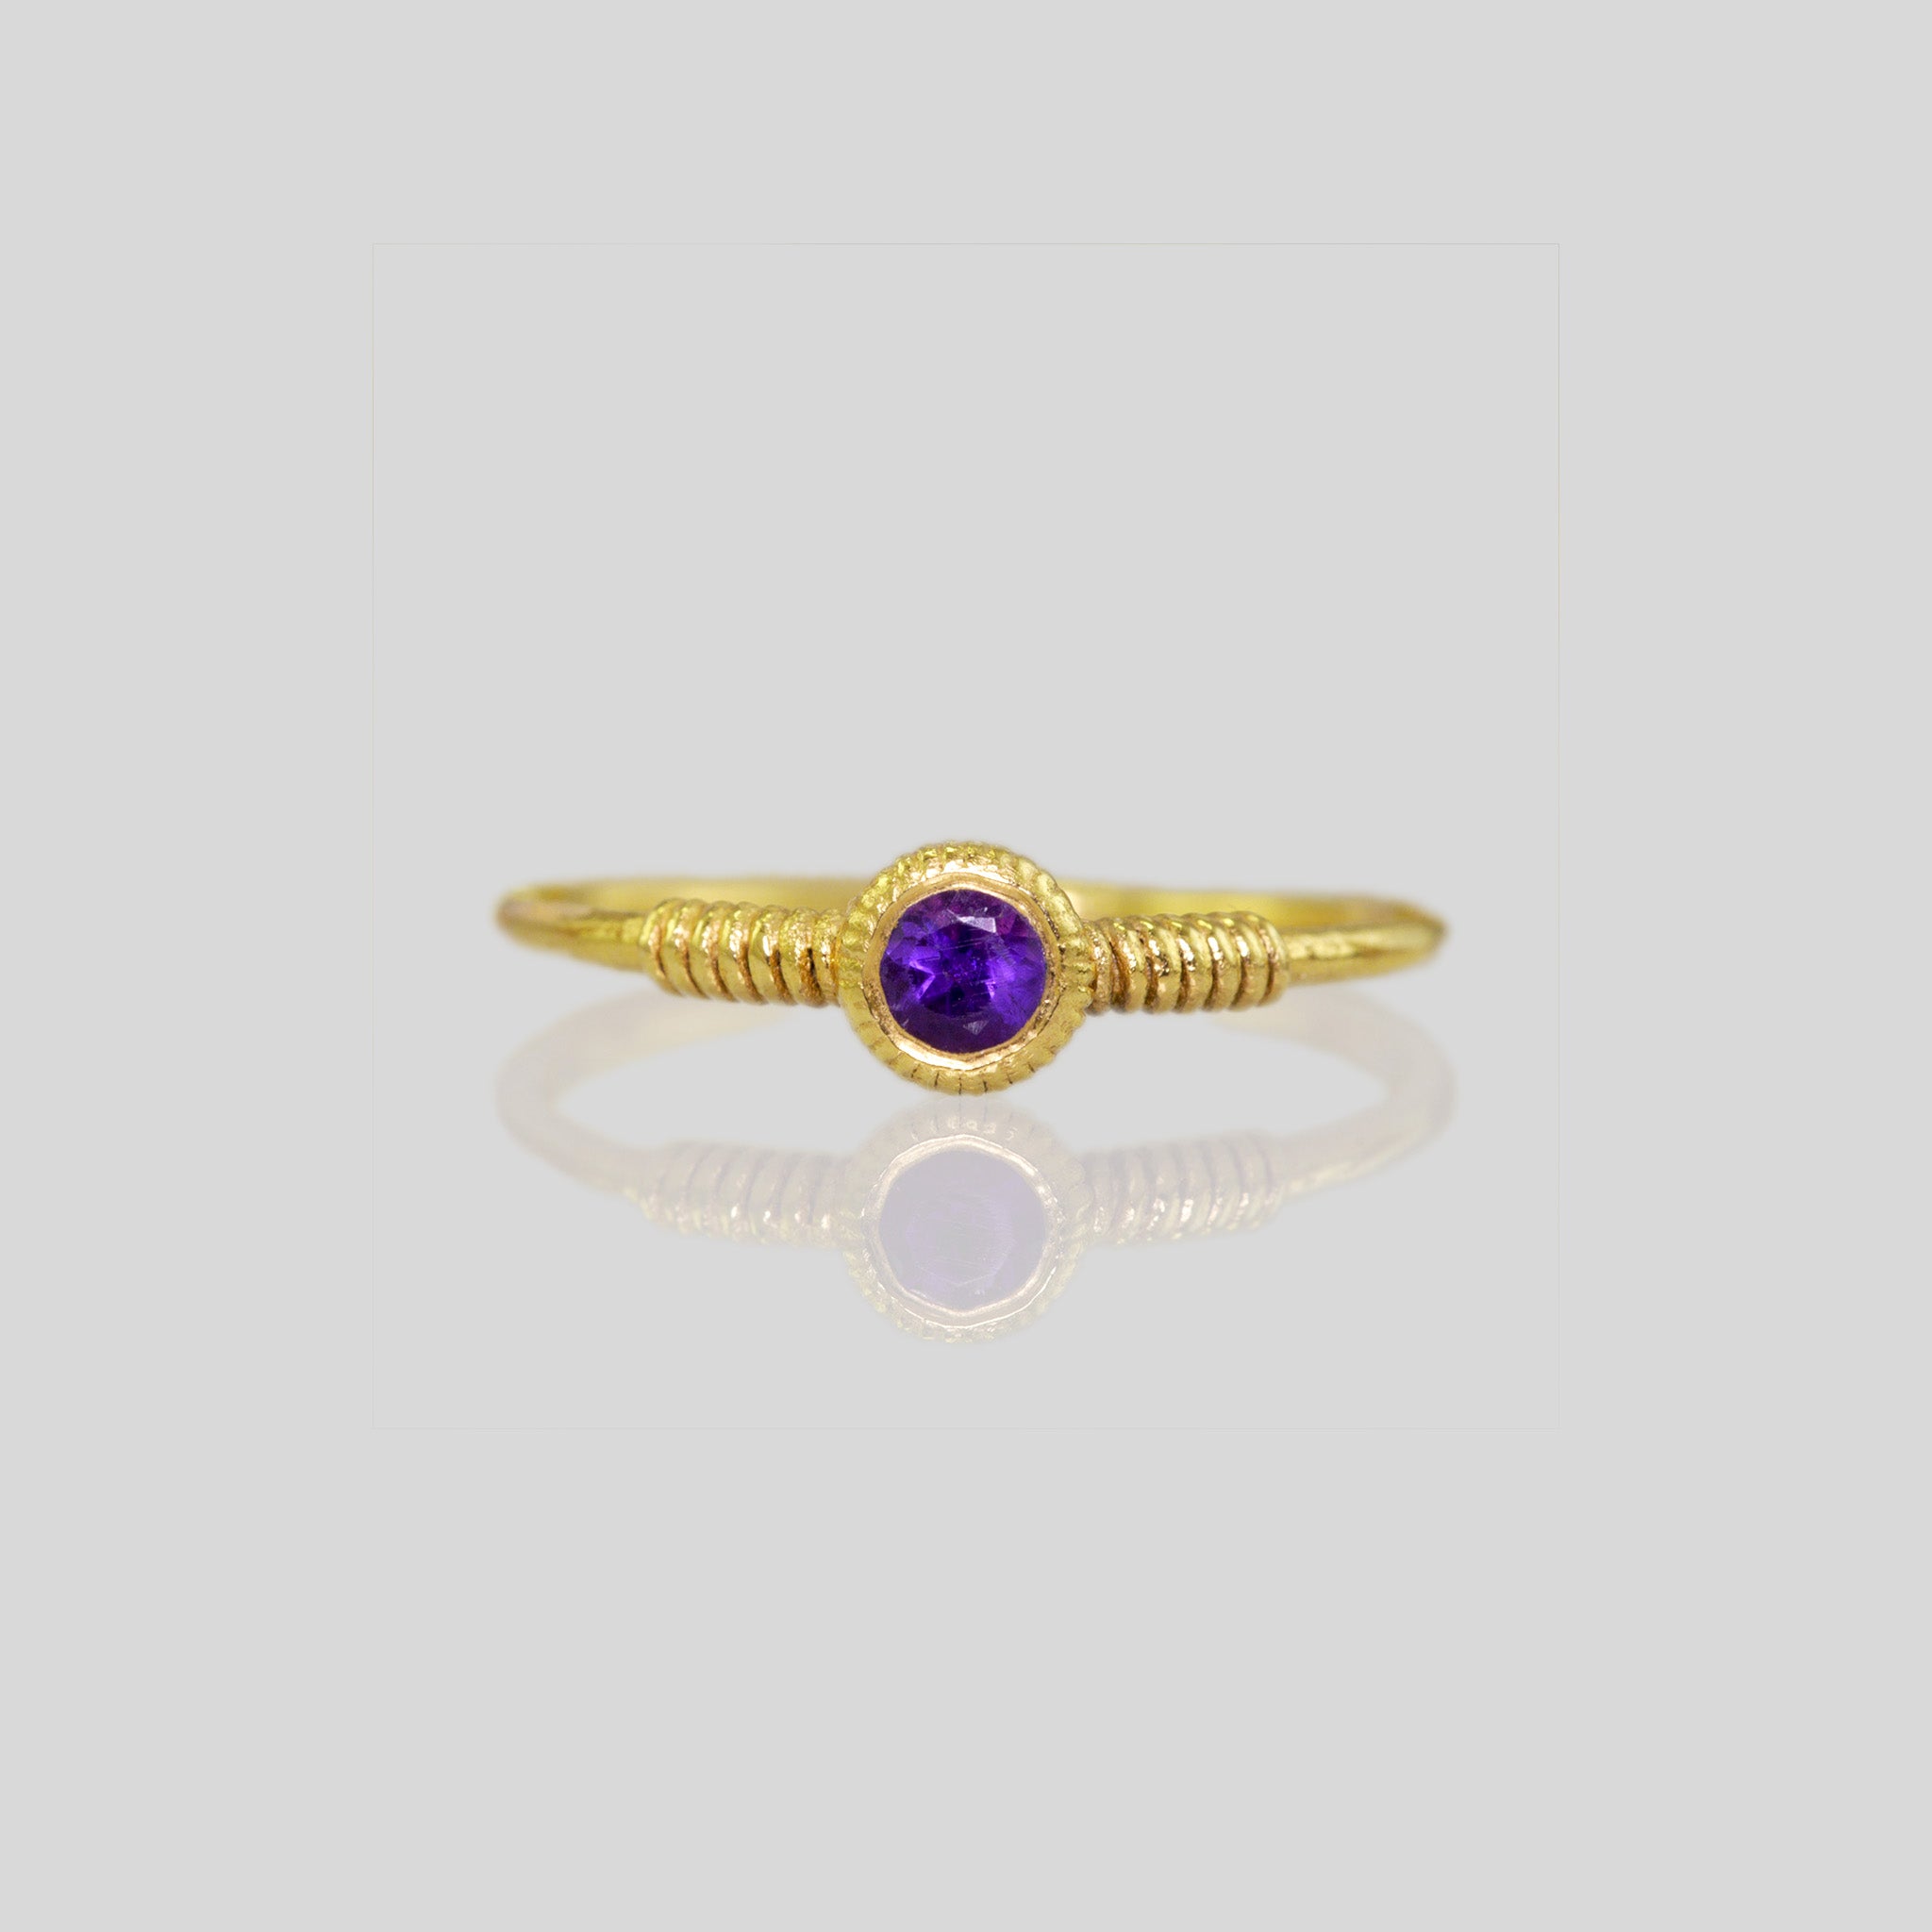 Front view of delicate gold coiled ring adorned with Amethyst gemstone, highlighting its graceful coiled design.